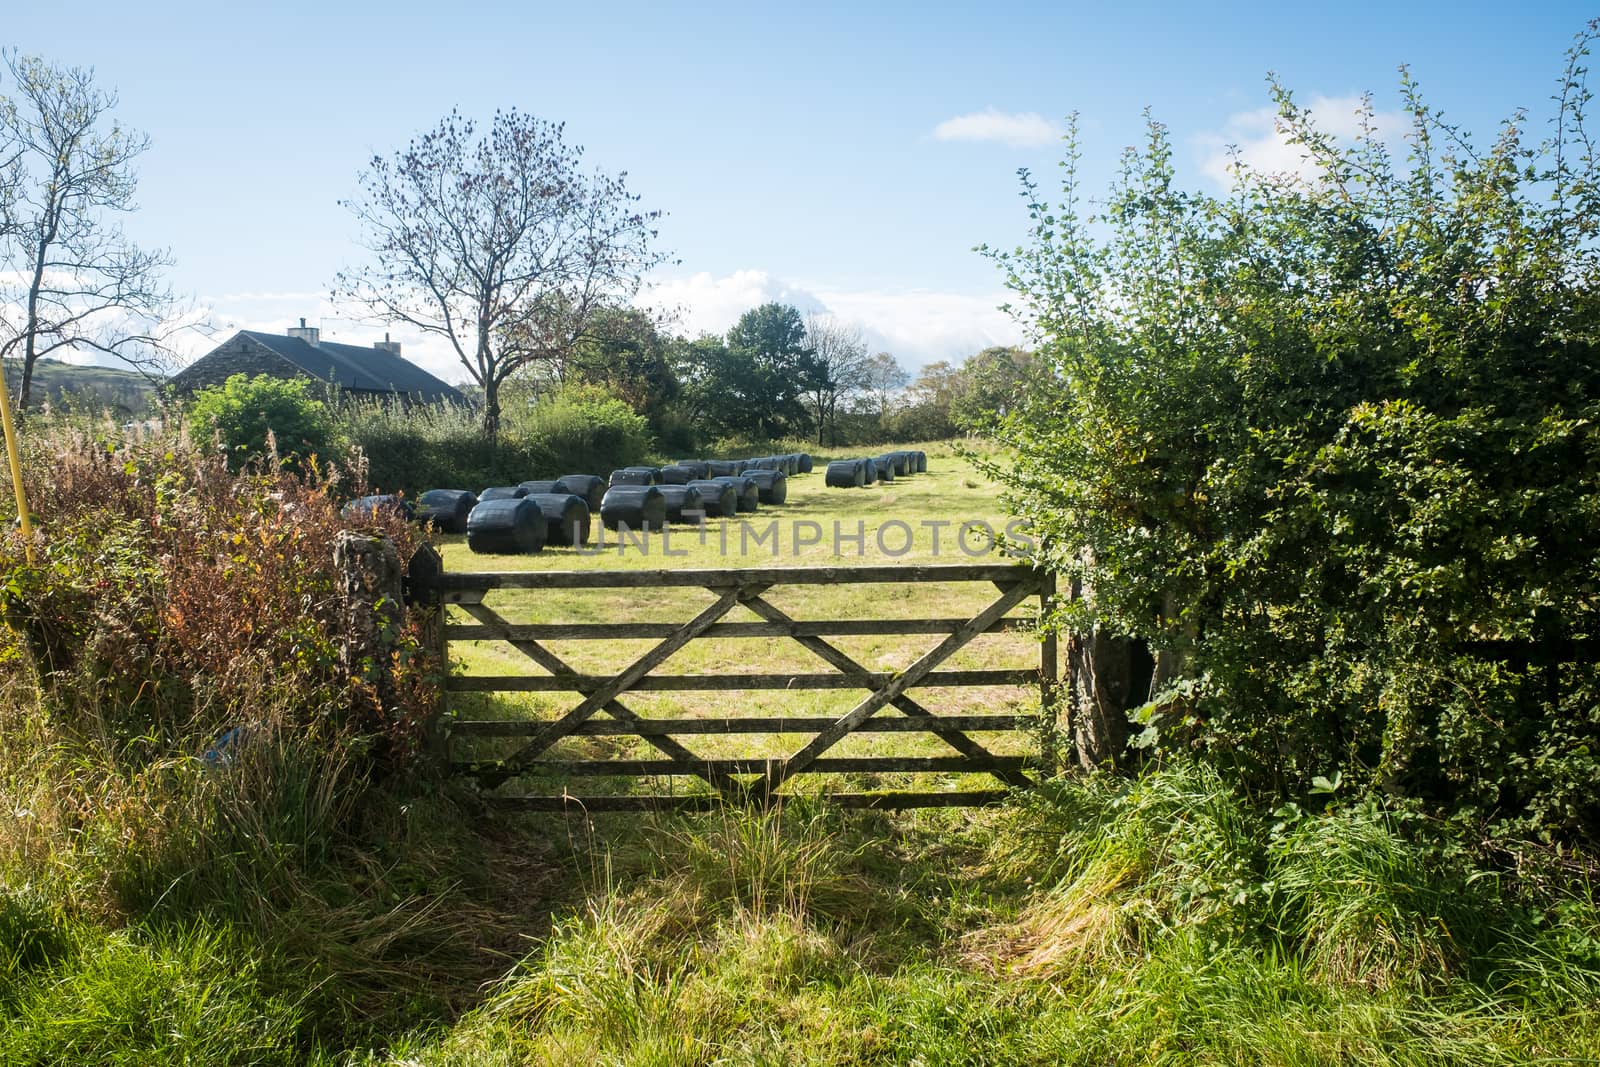 Wooden gate and hedge in the Lake District